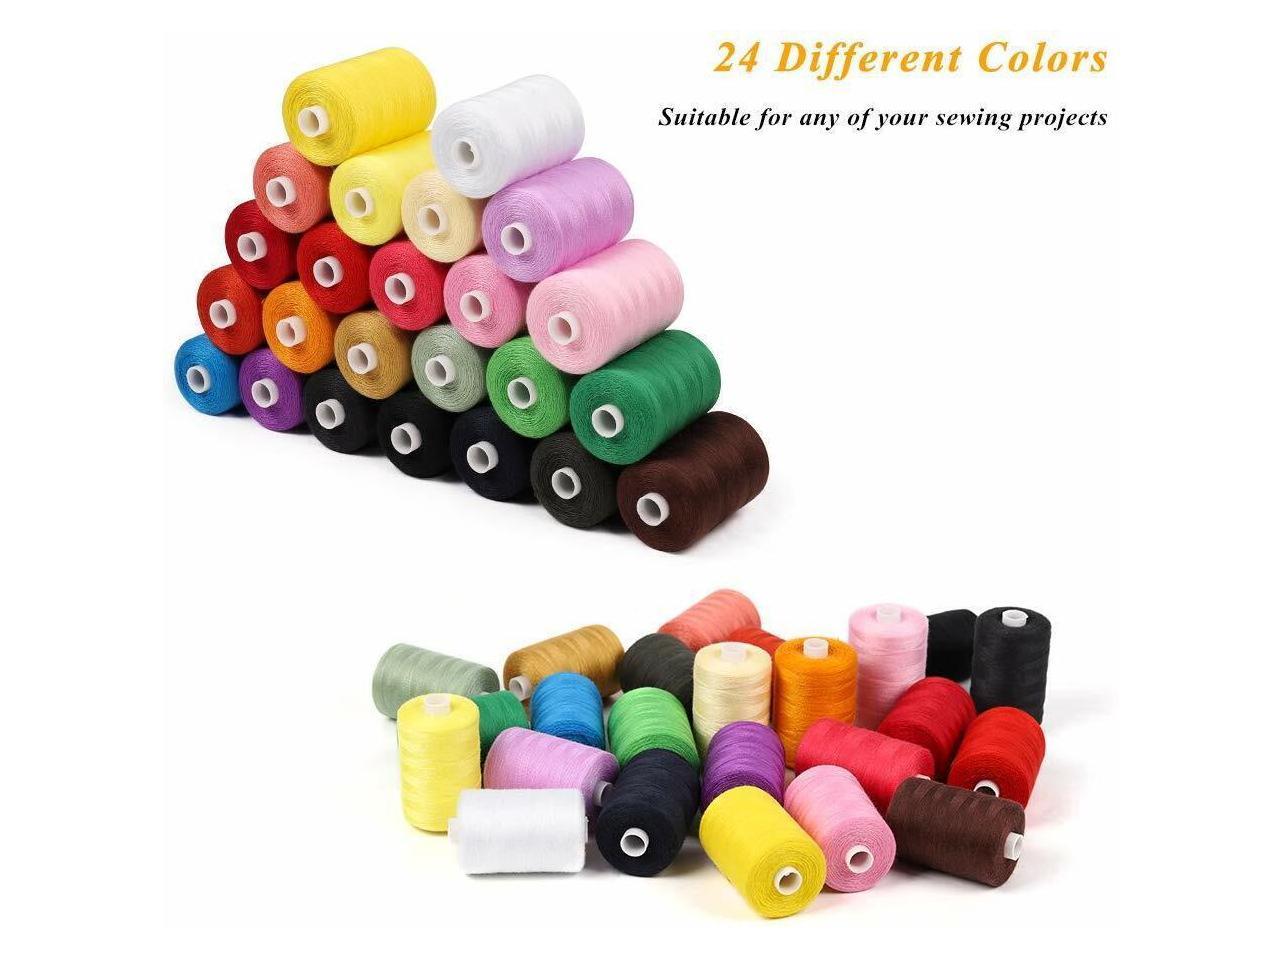 24 Assorted Colors Polyester Cotton Sewing Machine Thread Yard Set Reel Spool 